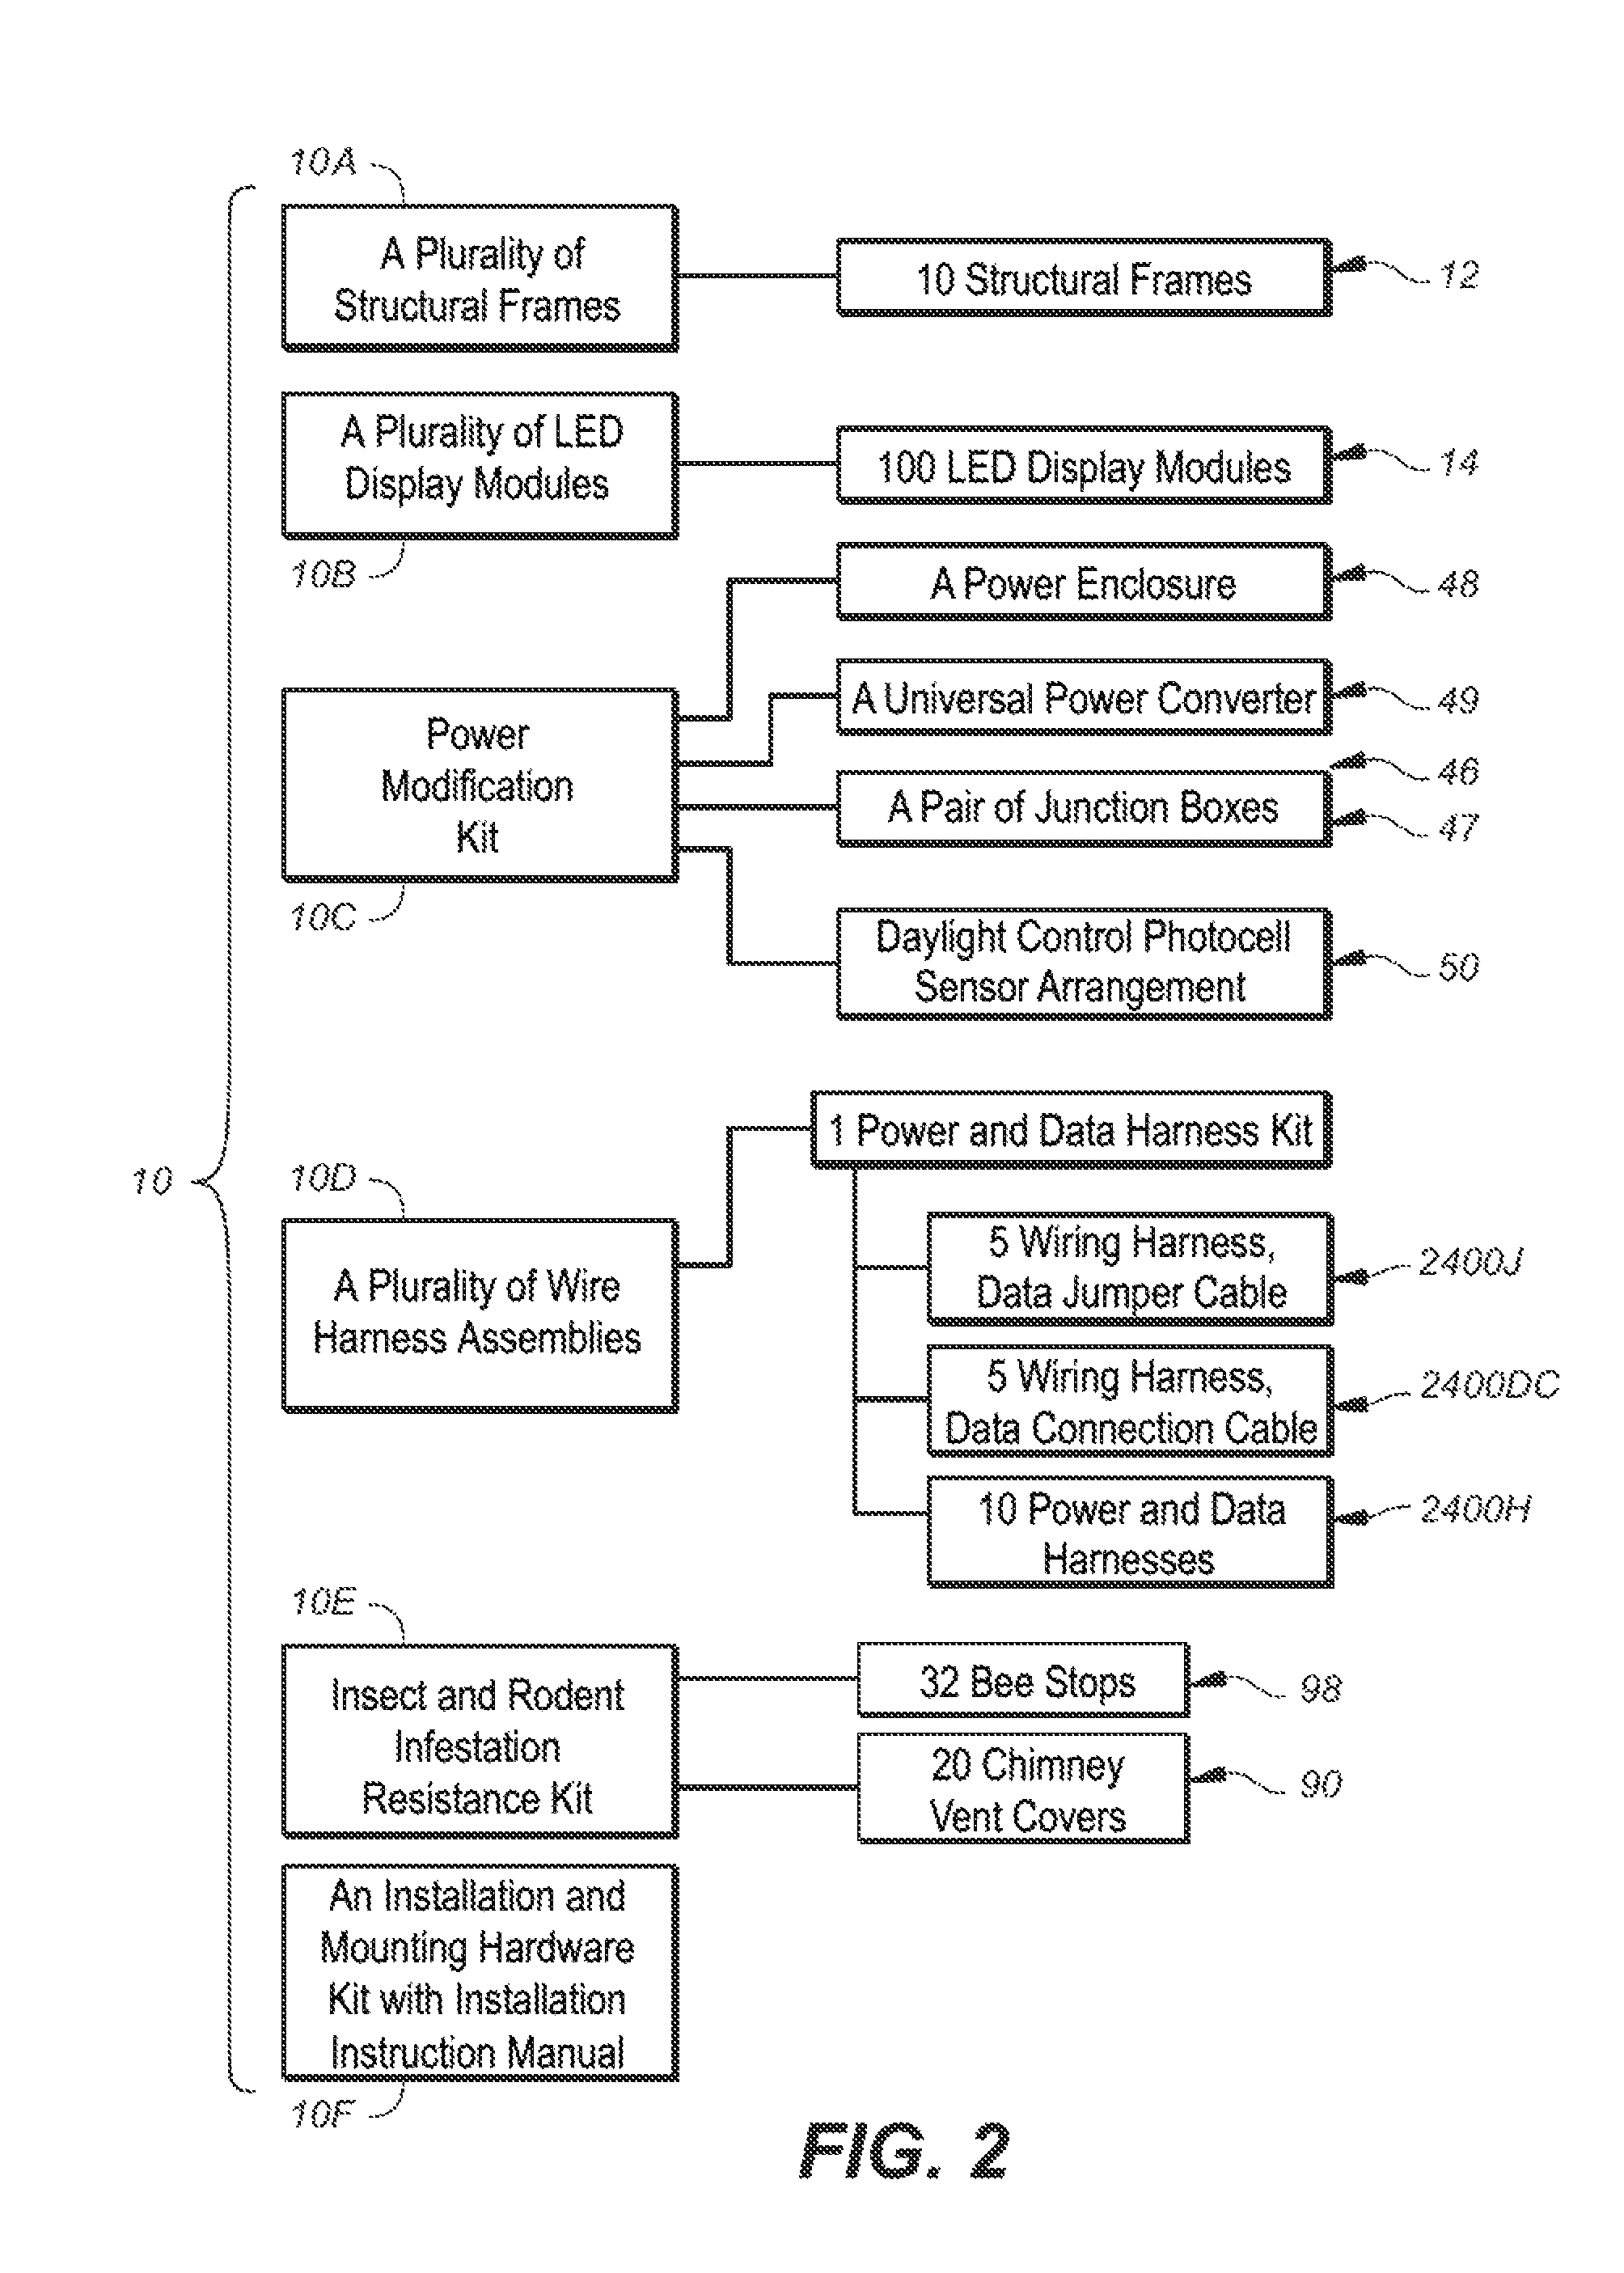 Modular installation and conversion kit for electronic sign structure and method of using same